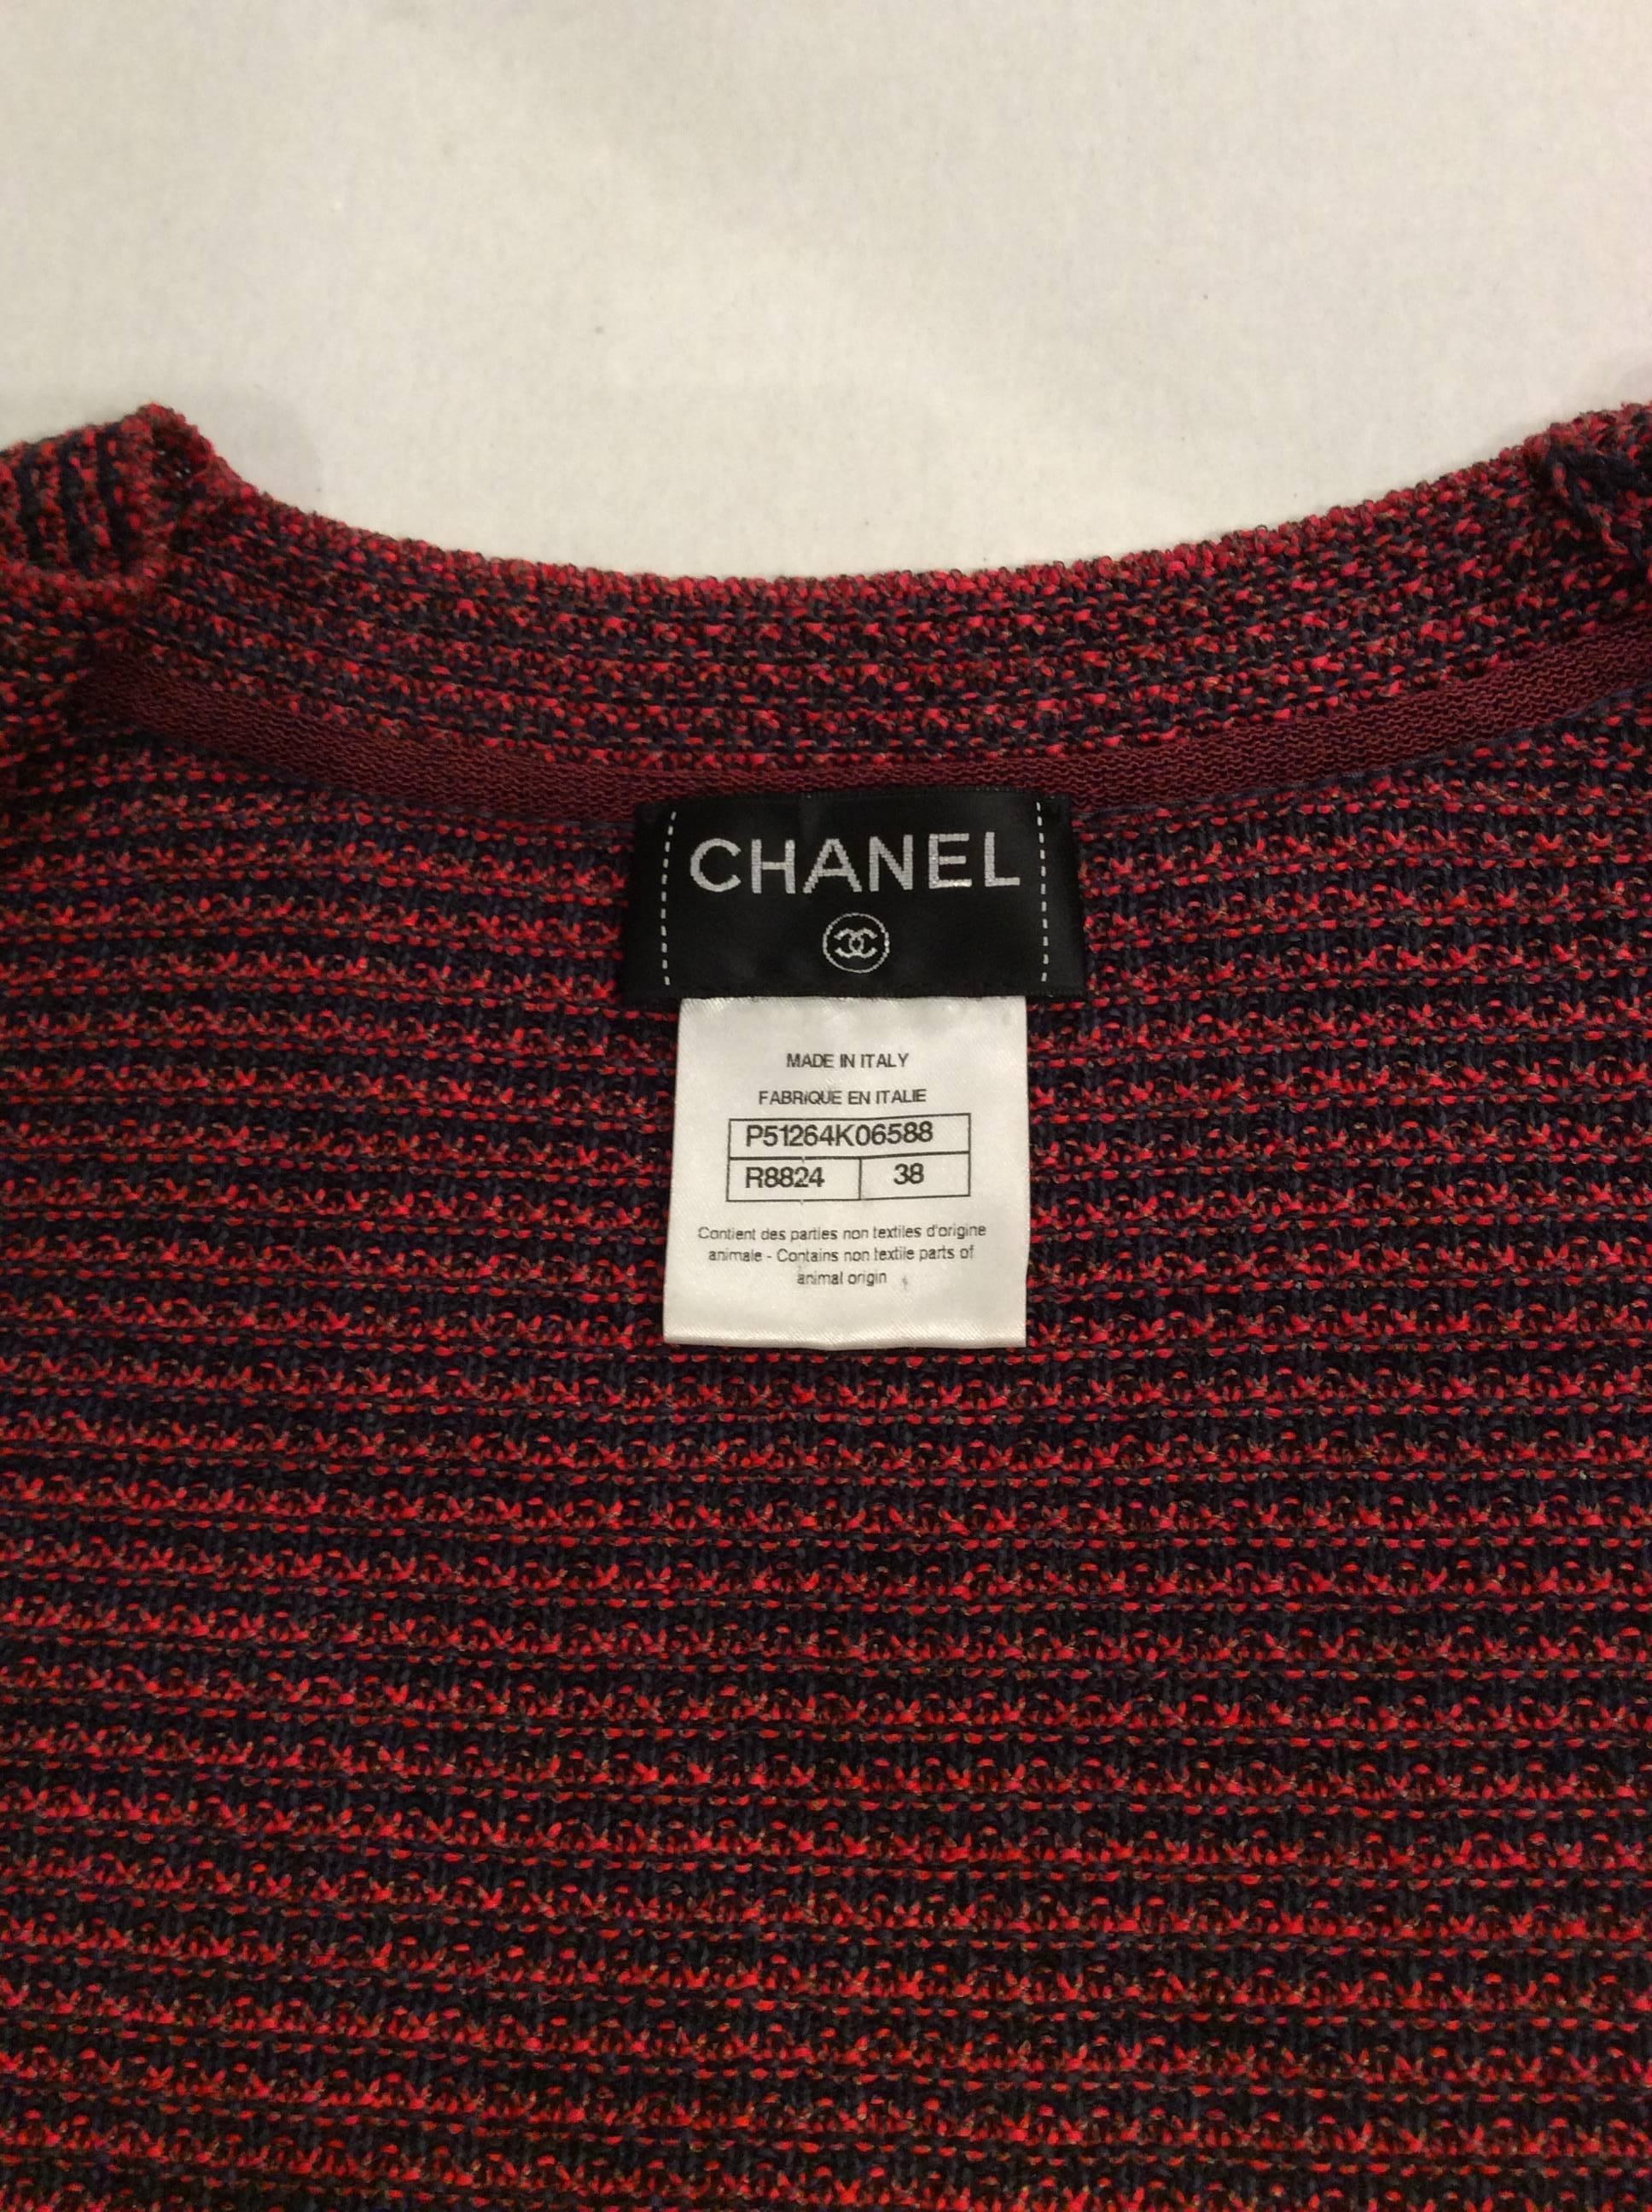 Chanel Knitted Brick-red And Navy Two Piece Skirt Outfit Sz38 (Us4) In Excellent Condition For Sale In San Francisco, CA